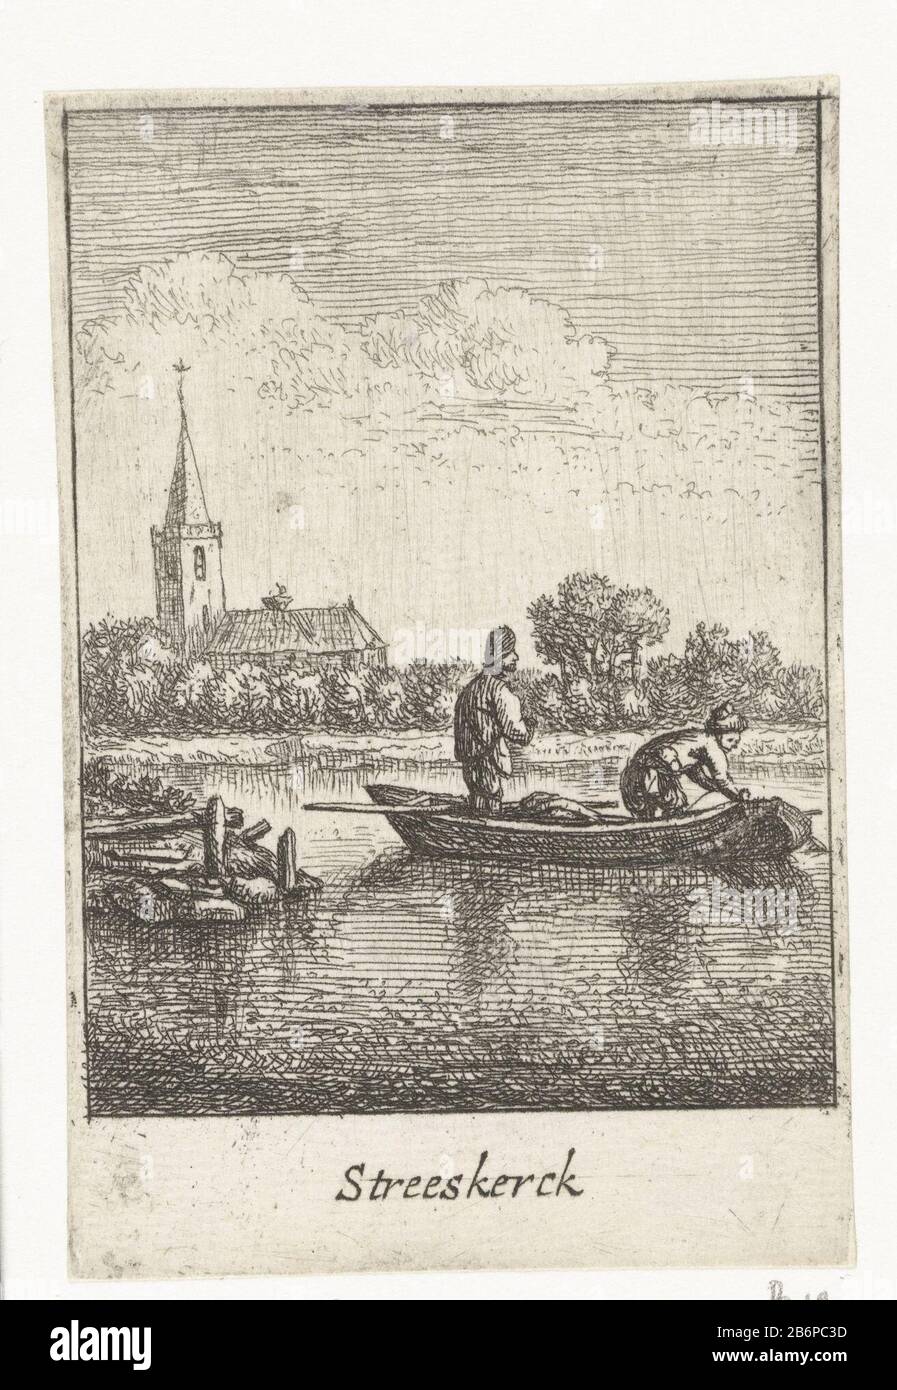 Gezicht op Streefkerk Streeskerck (titel op object) Nederlandse dorpsgezichten (serietitel) View Streeskerck from the water. Where: apparently refers here to the place Streefkerk and there is a mistake in the transcription of the f and s. Print out a series of twelve villages of Dutch places near Utrecht boats voorgrond. Manufacturer : printmaker Jan van Almelo Veen to design Herman SaftlevenPlaats manufacture: Netherlands Date: 1662 - 1683 Physical features: etching material: paper Technique: etching Dimensions: leaf : h × 85 mm b 55 mm Subject: village where streefkerk Stock Photo